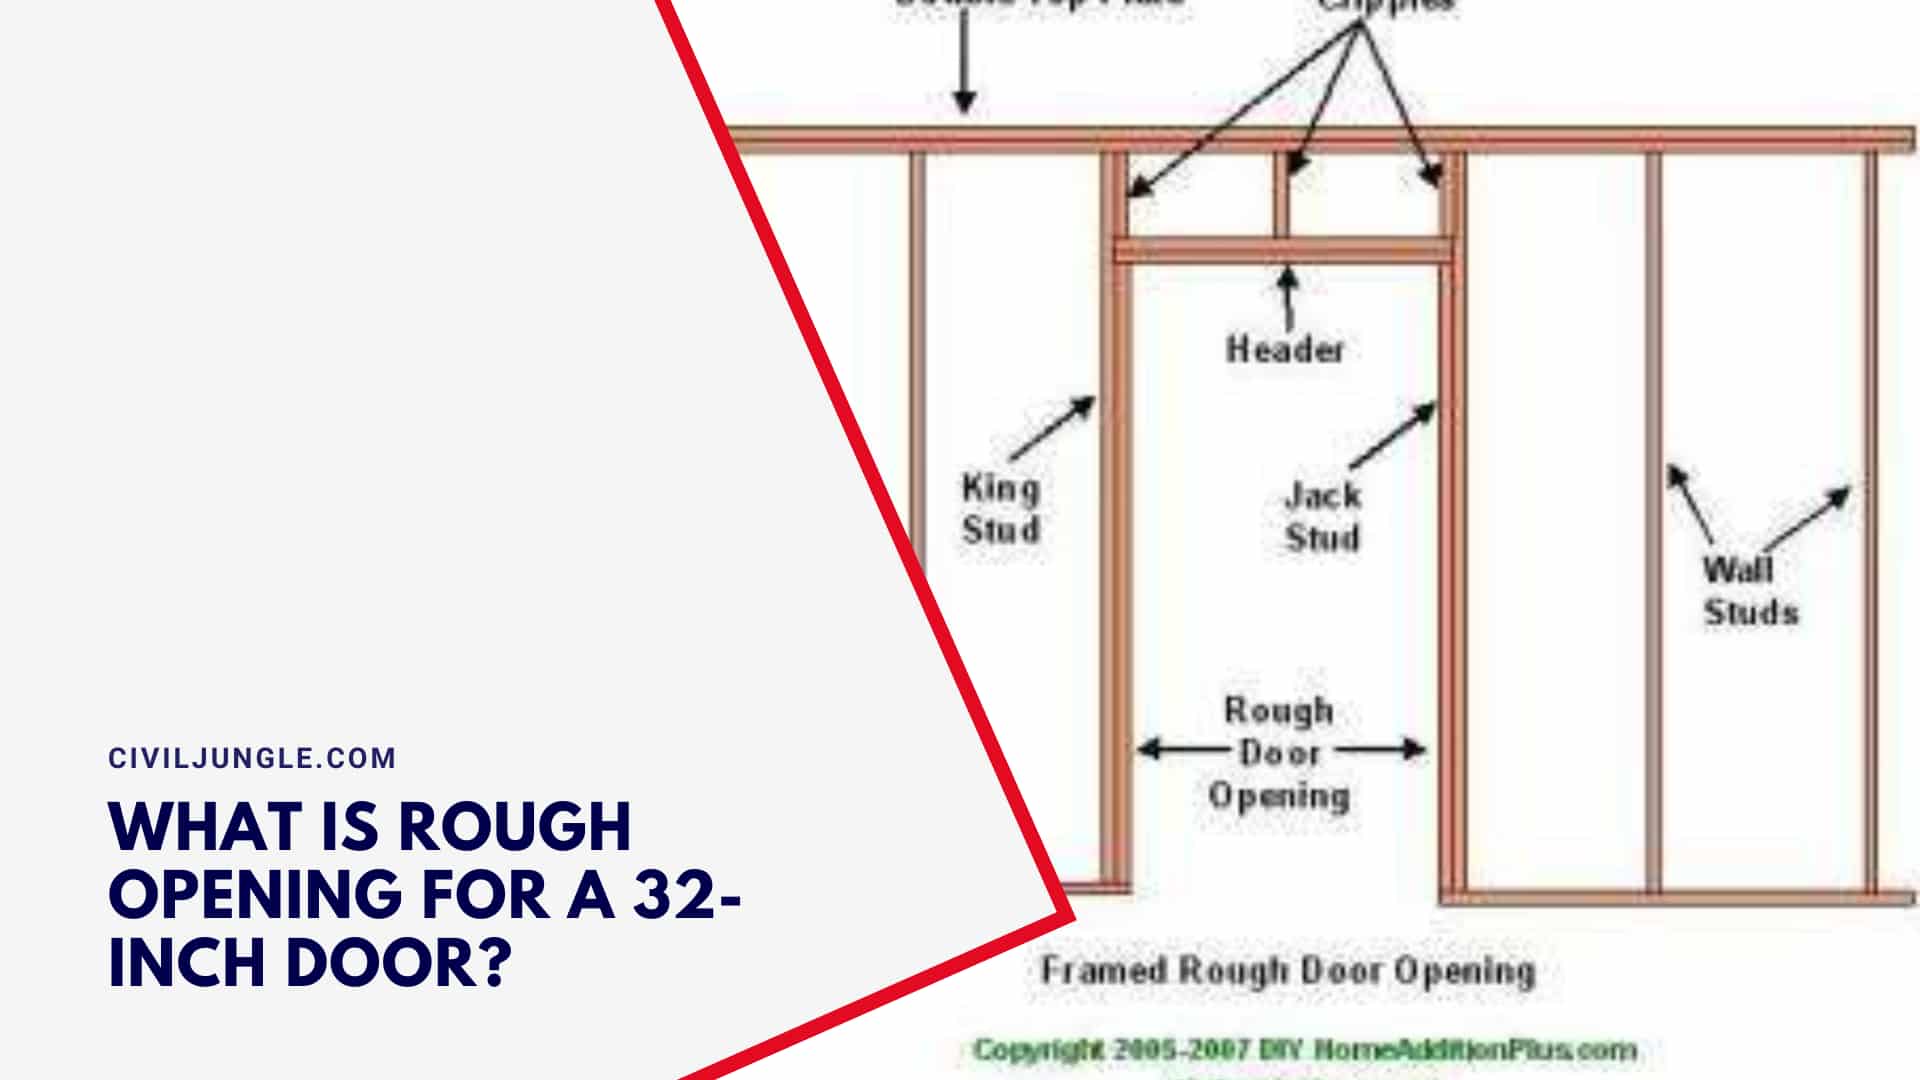 What Is Rough Opening for a 32-Inch Door?